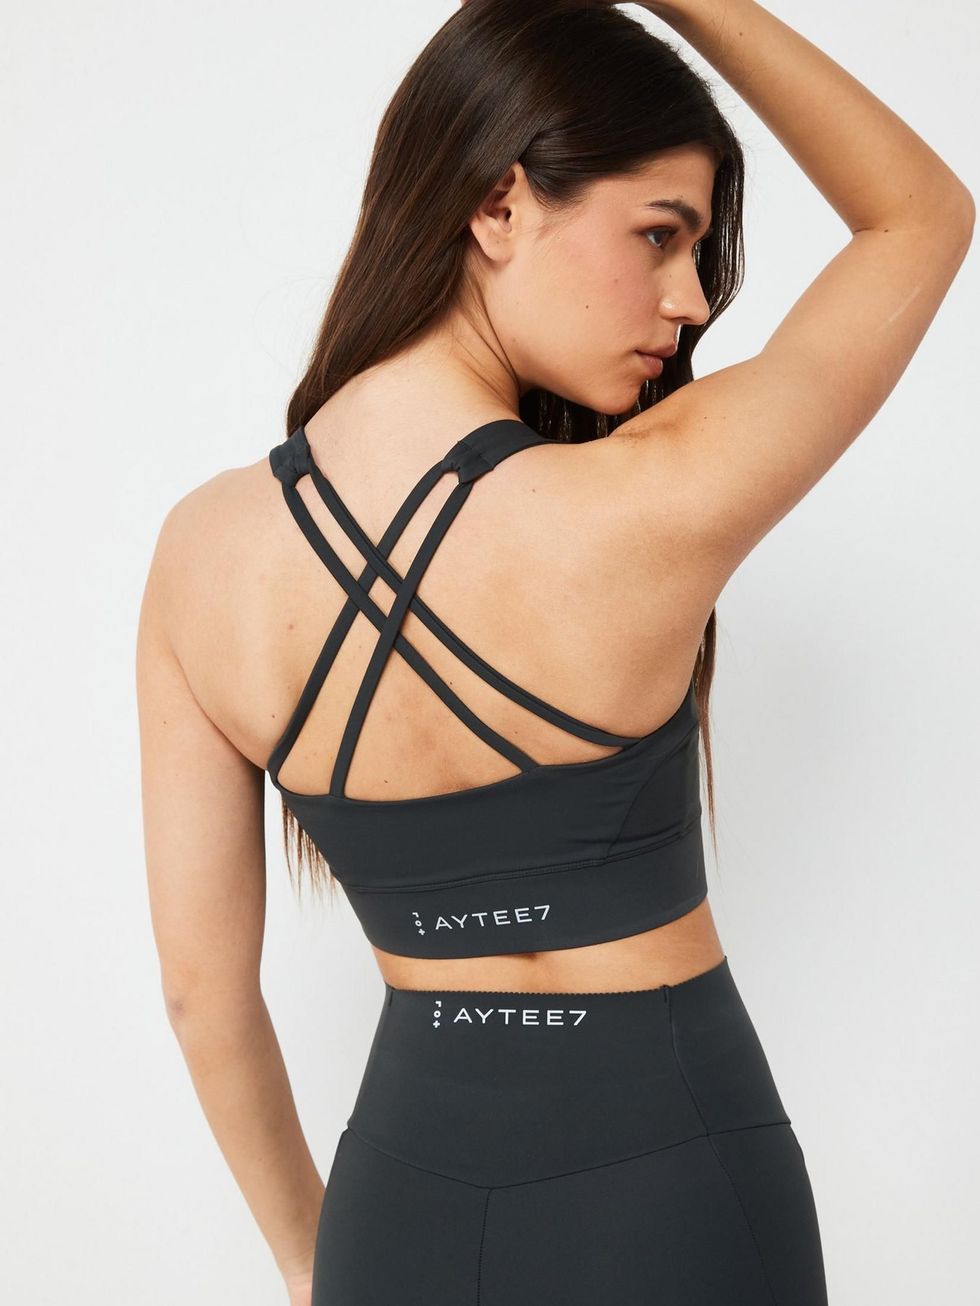 Performance Sports Bra With Strappy Back - Charcoal